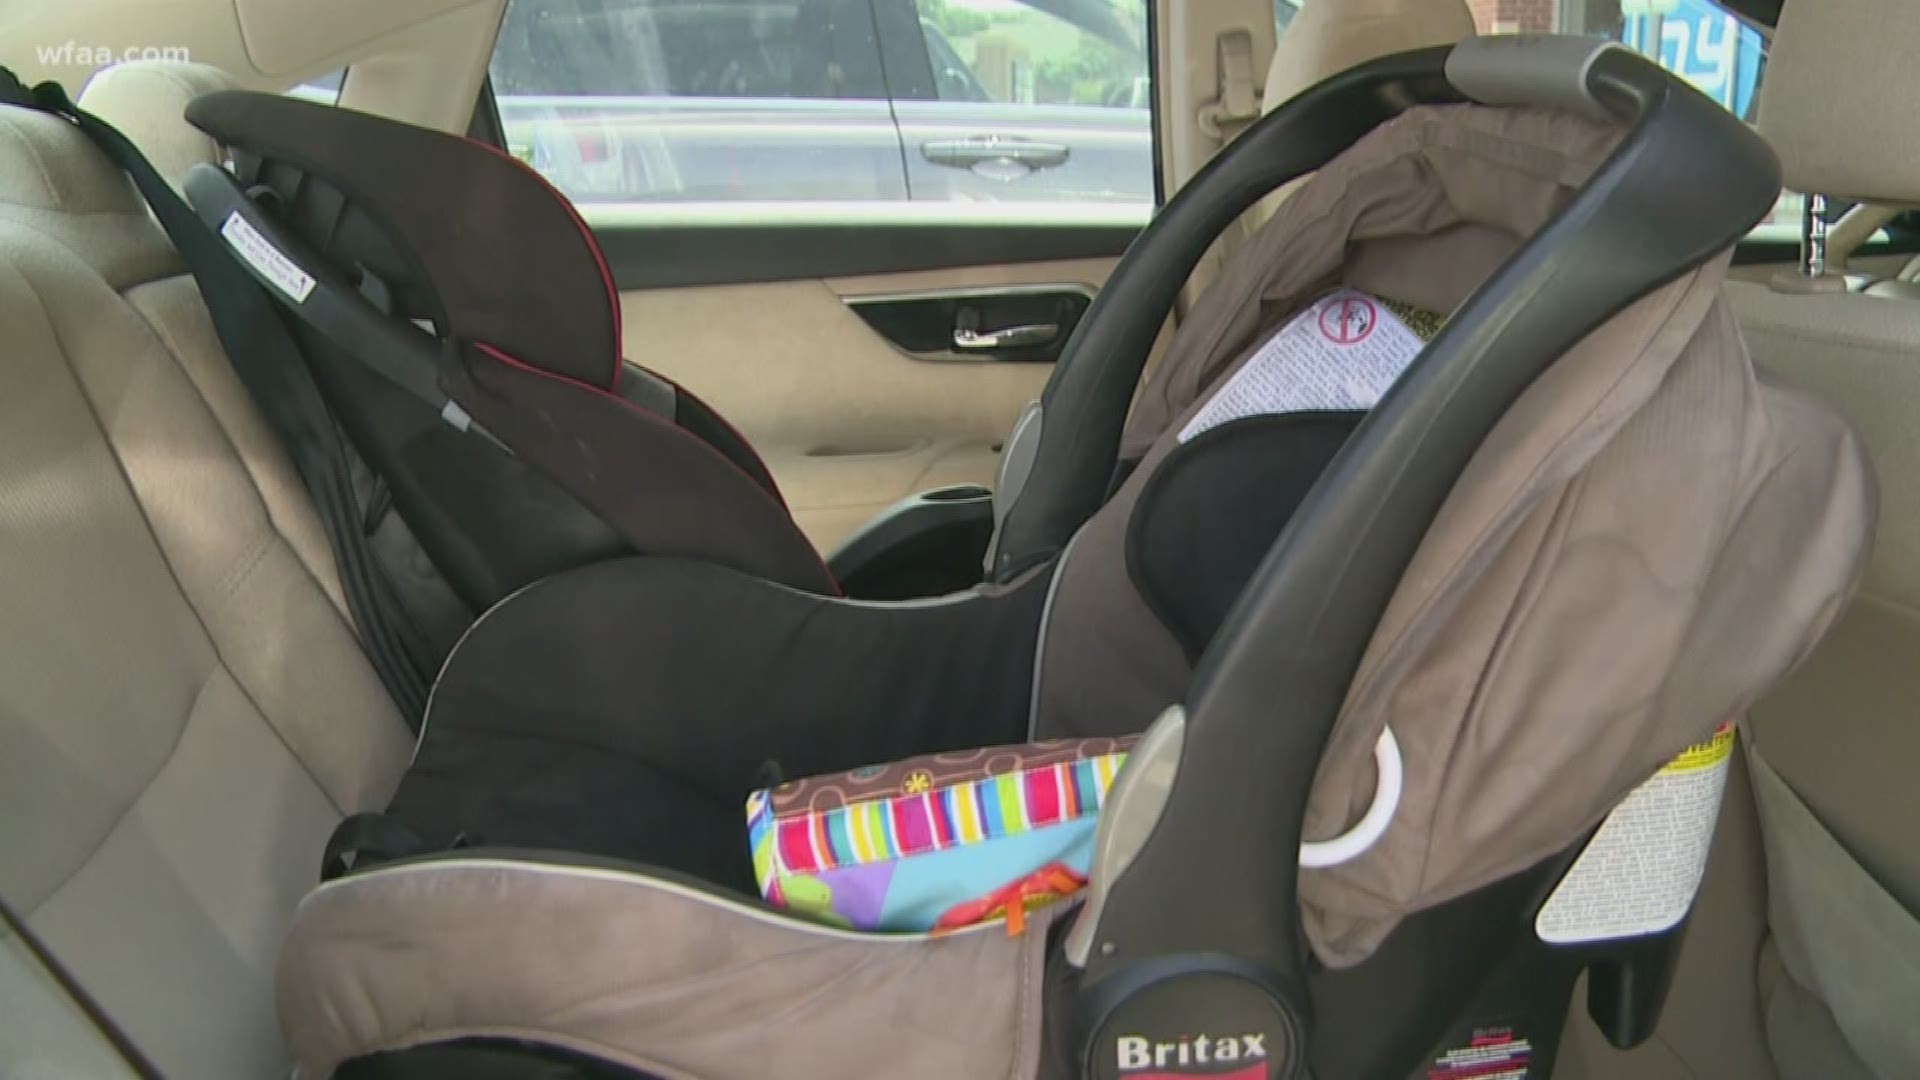 Texas leads the nation in the number of children who die in hot cars.